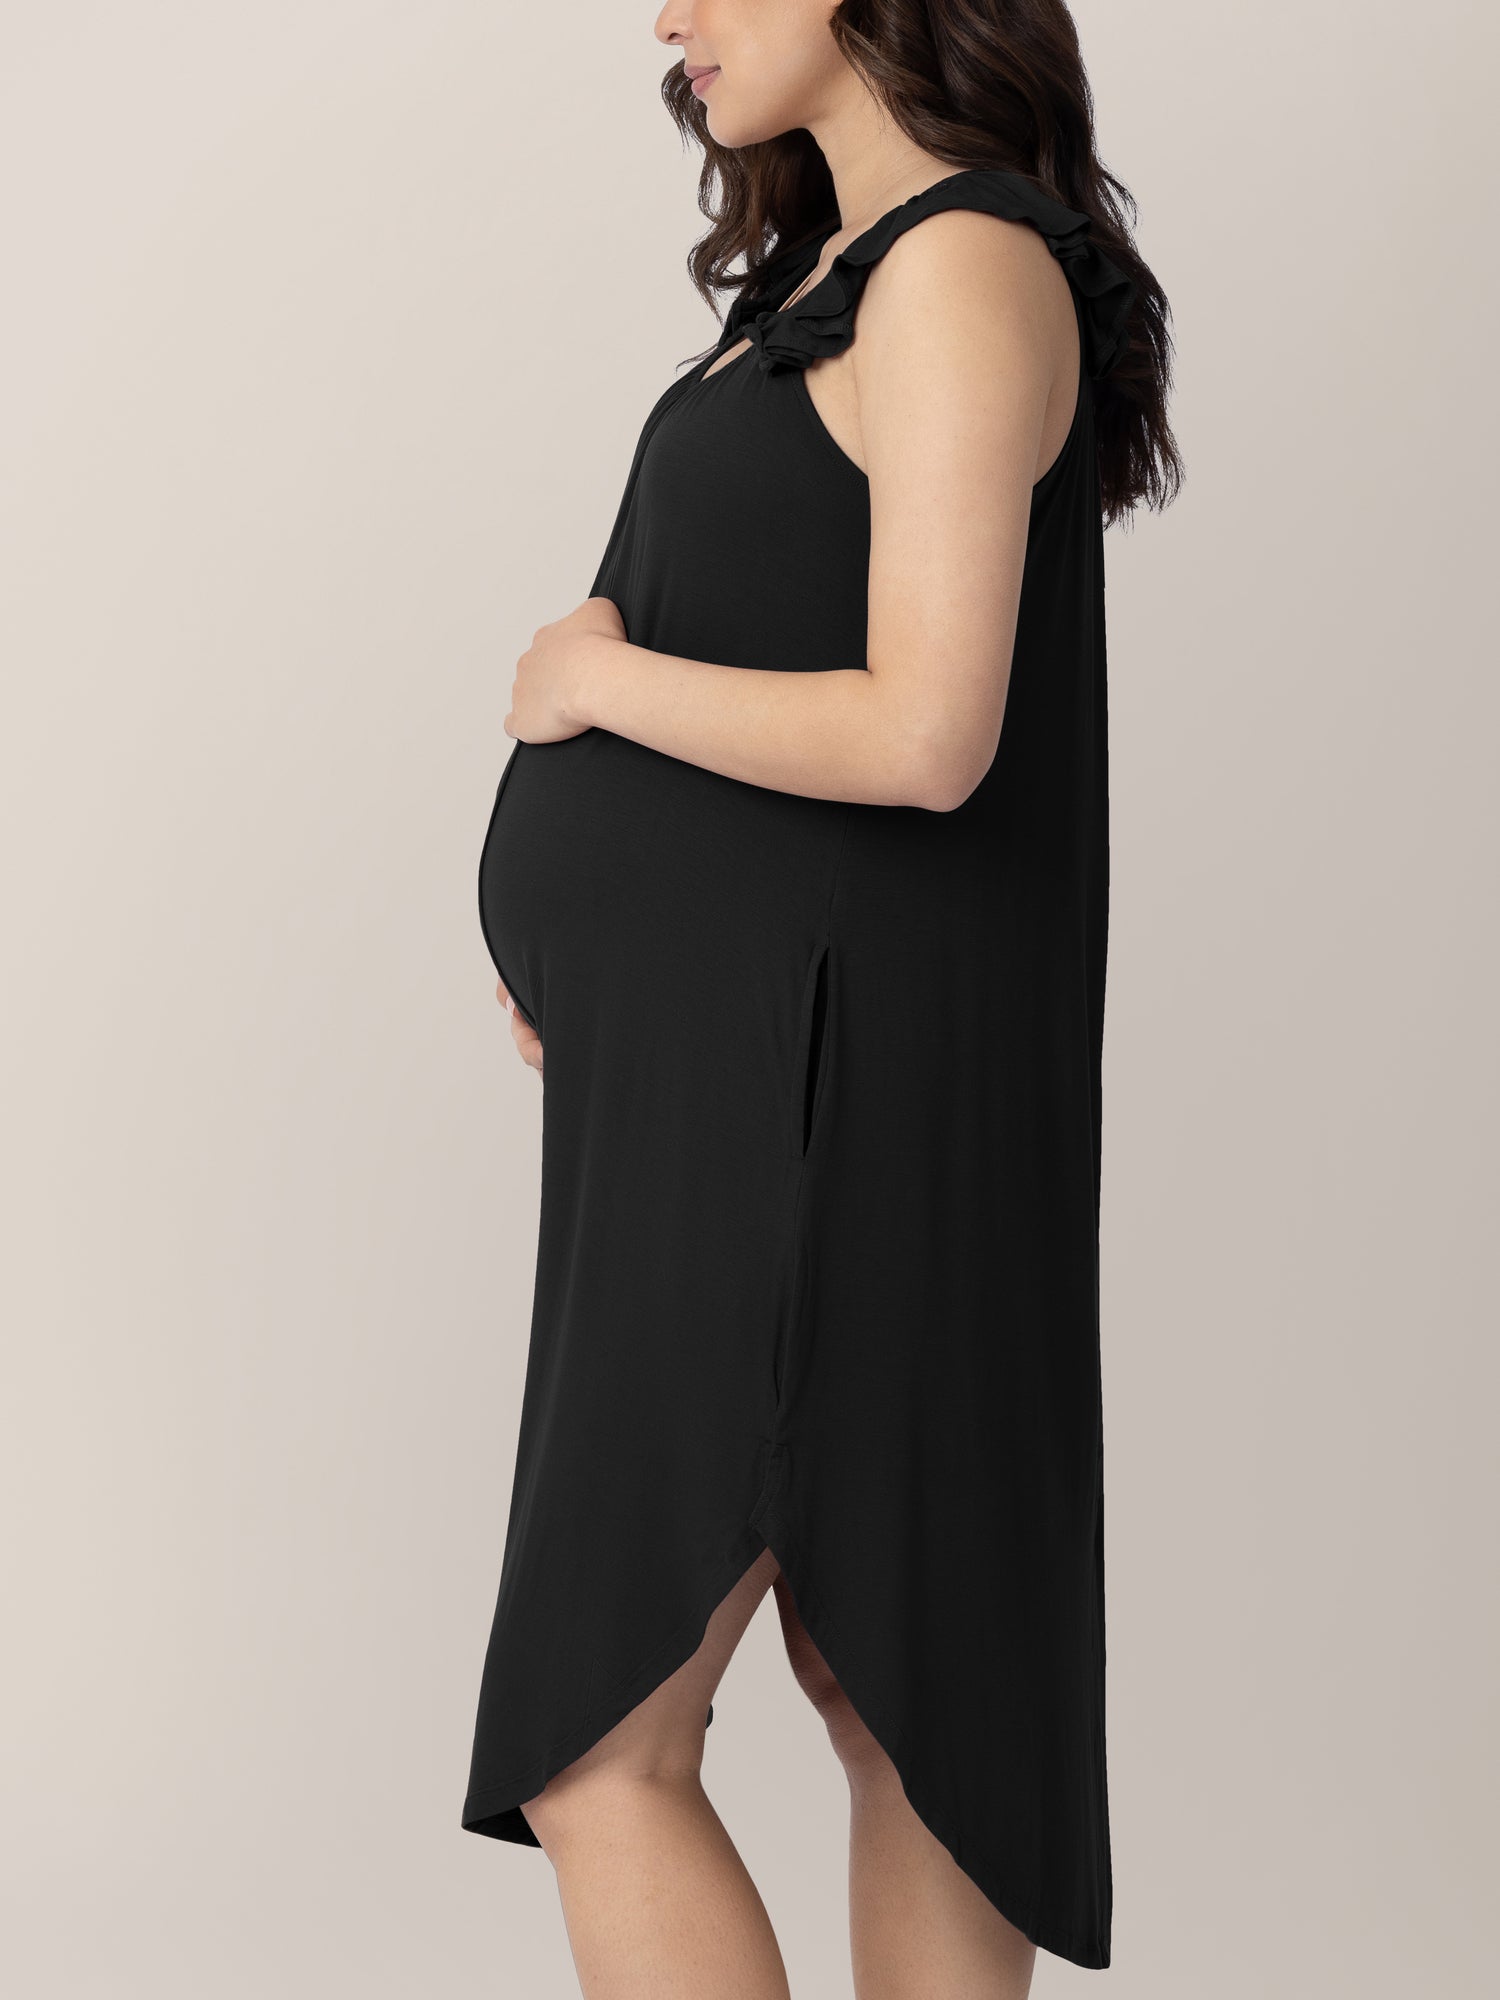 Side view of a pregnant model wearing the Ruffle Strap Labor & Delivery Gown in Black showing the pocket.